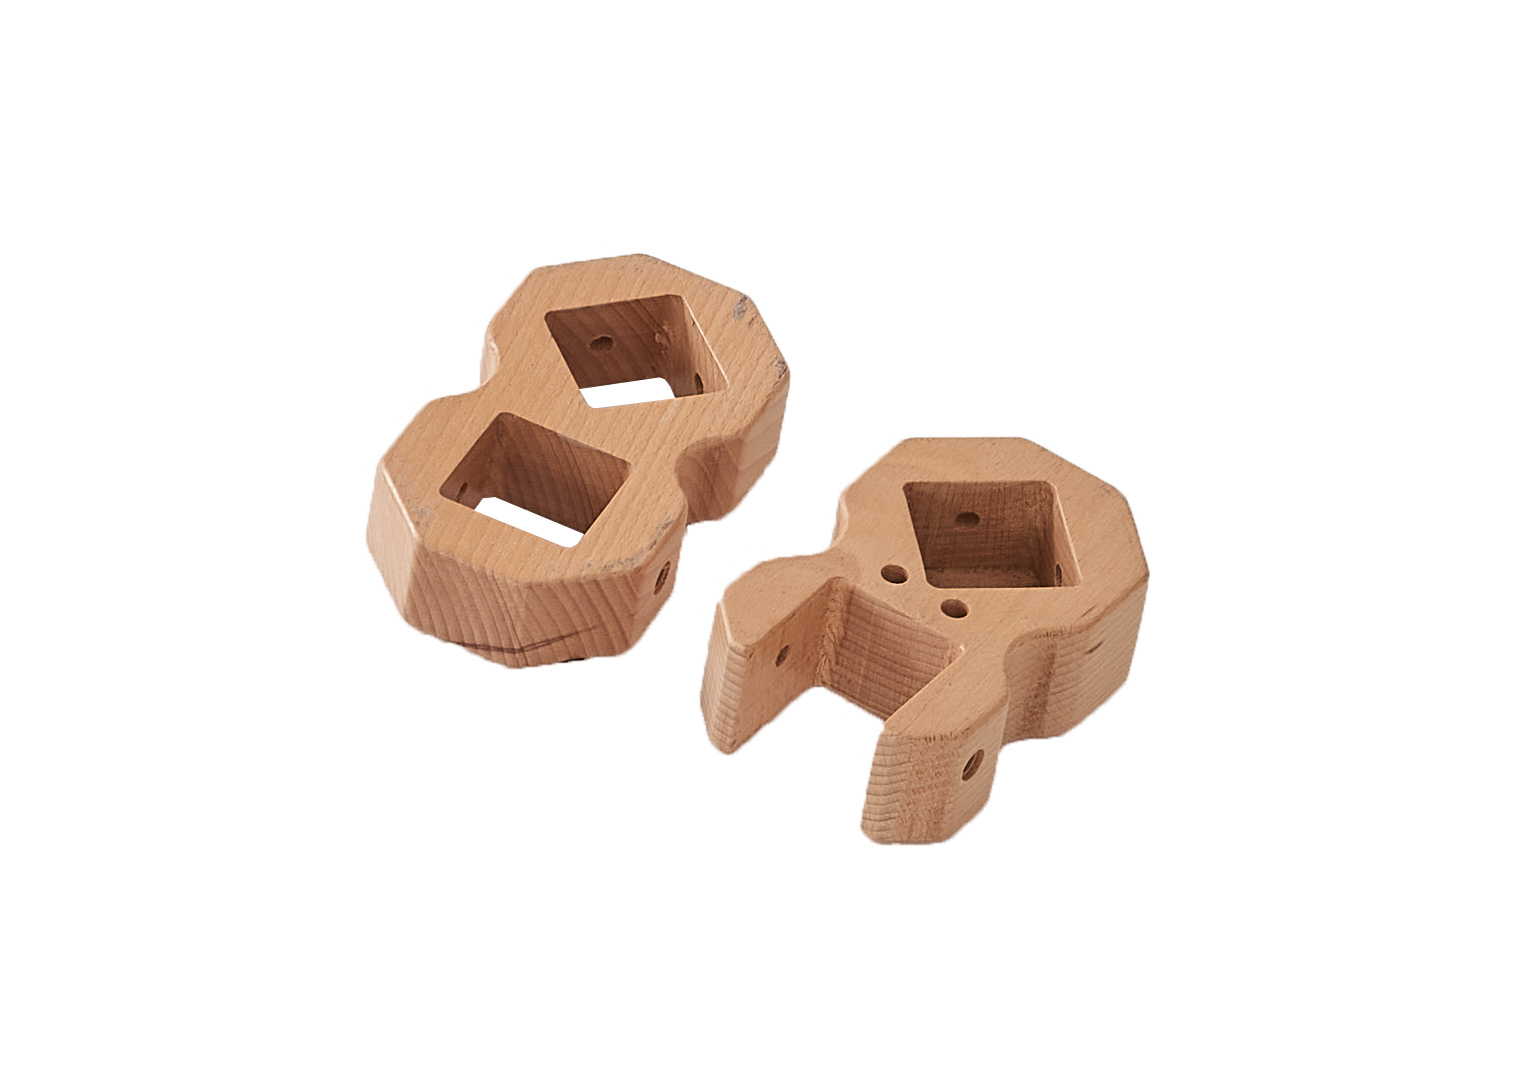 Type II Connector 2-Piece Set - 2 Panels of Different Heights at 135° Inner Angle